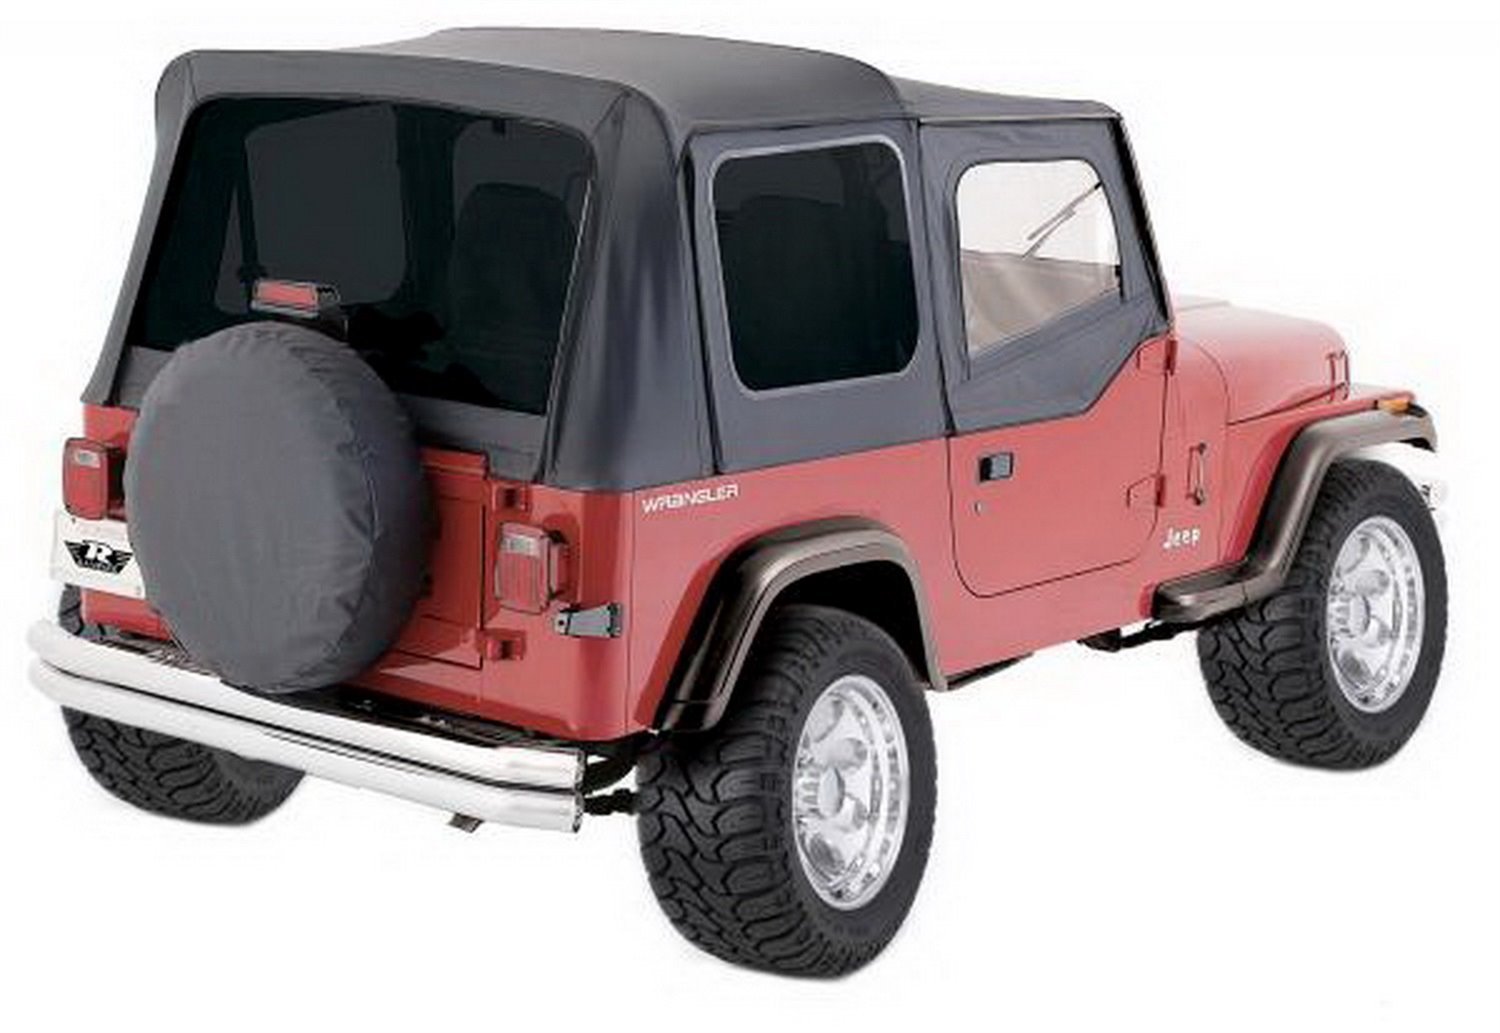 Factory Replacement Soft Top for 1988-1995 Jeep Wrangler